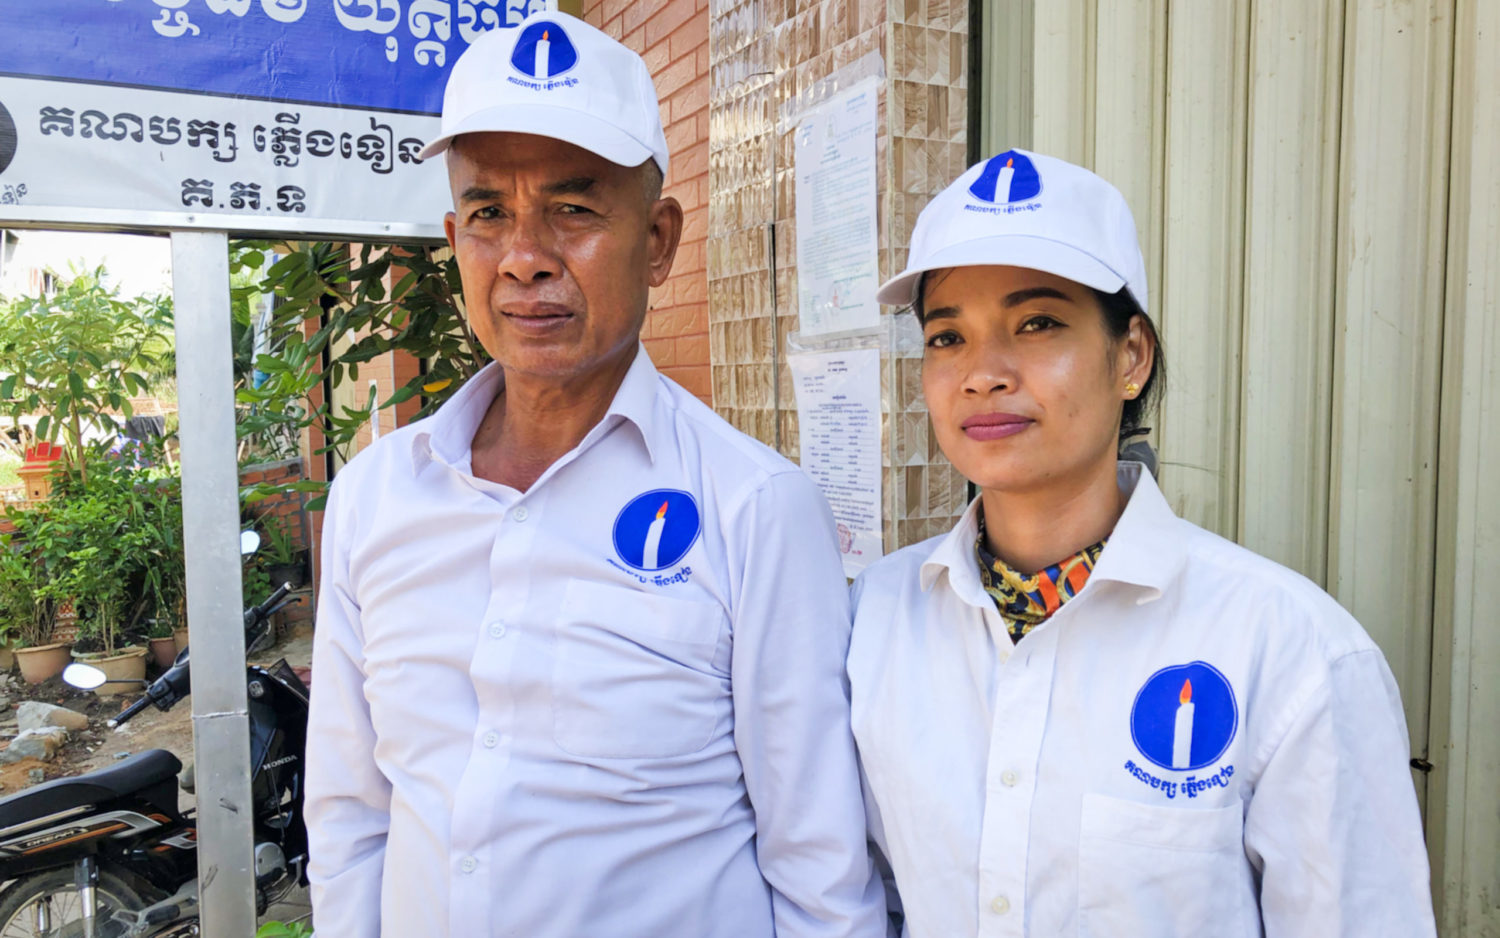 Chao Ratanak, Candlelight Party’s commune chief candidate in Poipet commune, stands next to her father, Chao Veasna, a former opposition councilor in the commune, outside her house on May 14, 2022. (Matt Surrusco/VOD)